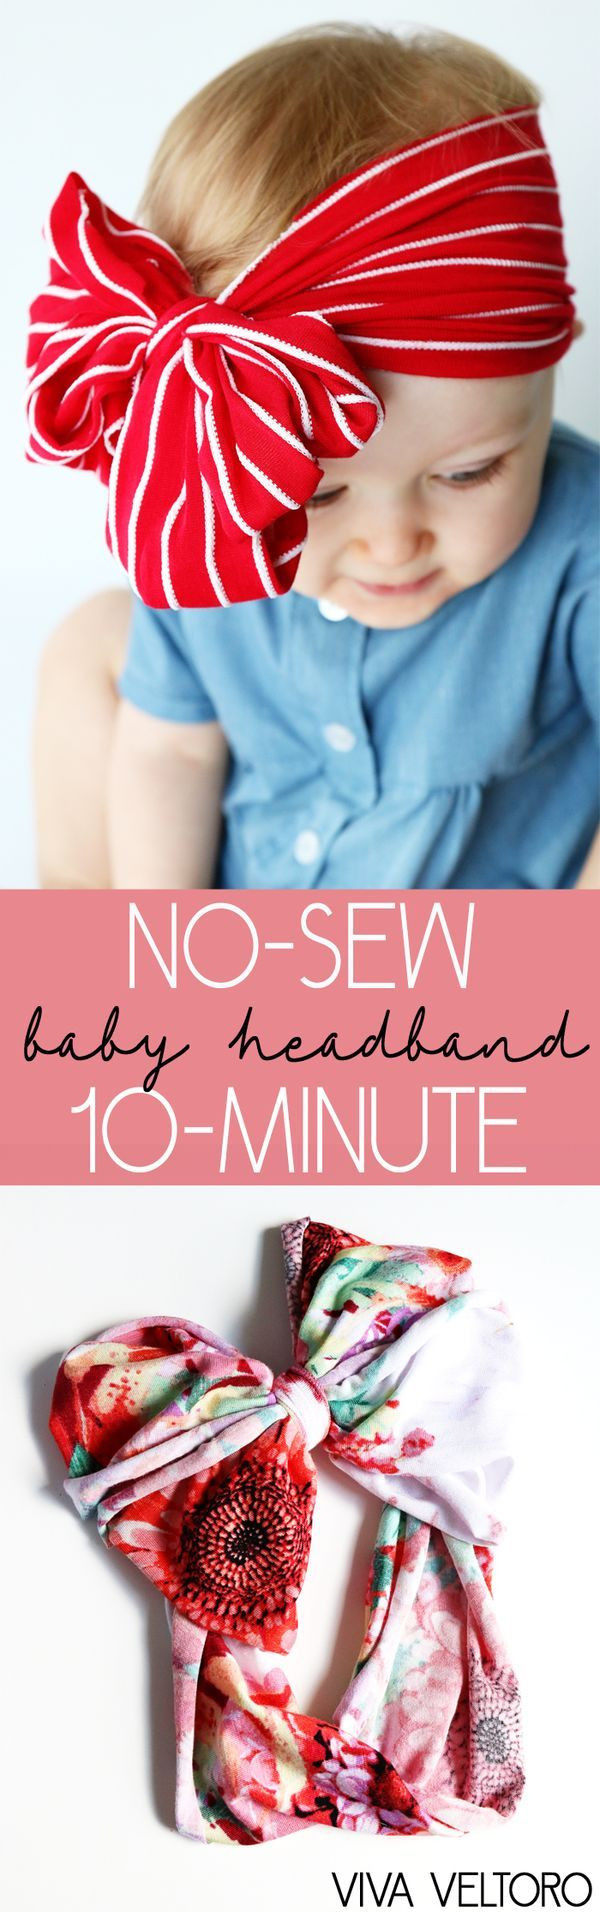 Diy Baby Bow Headbands
 How to Make Baby Headbands Without Sewing